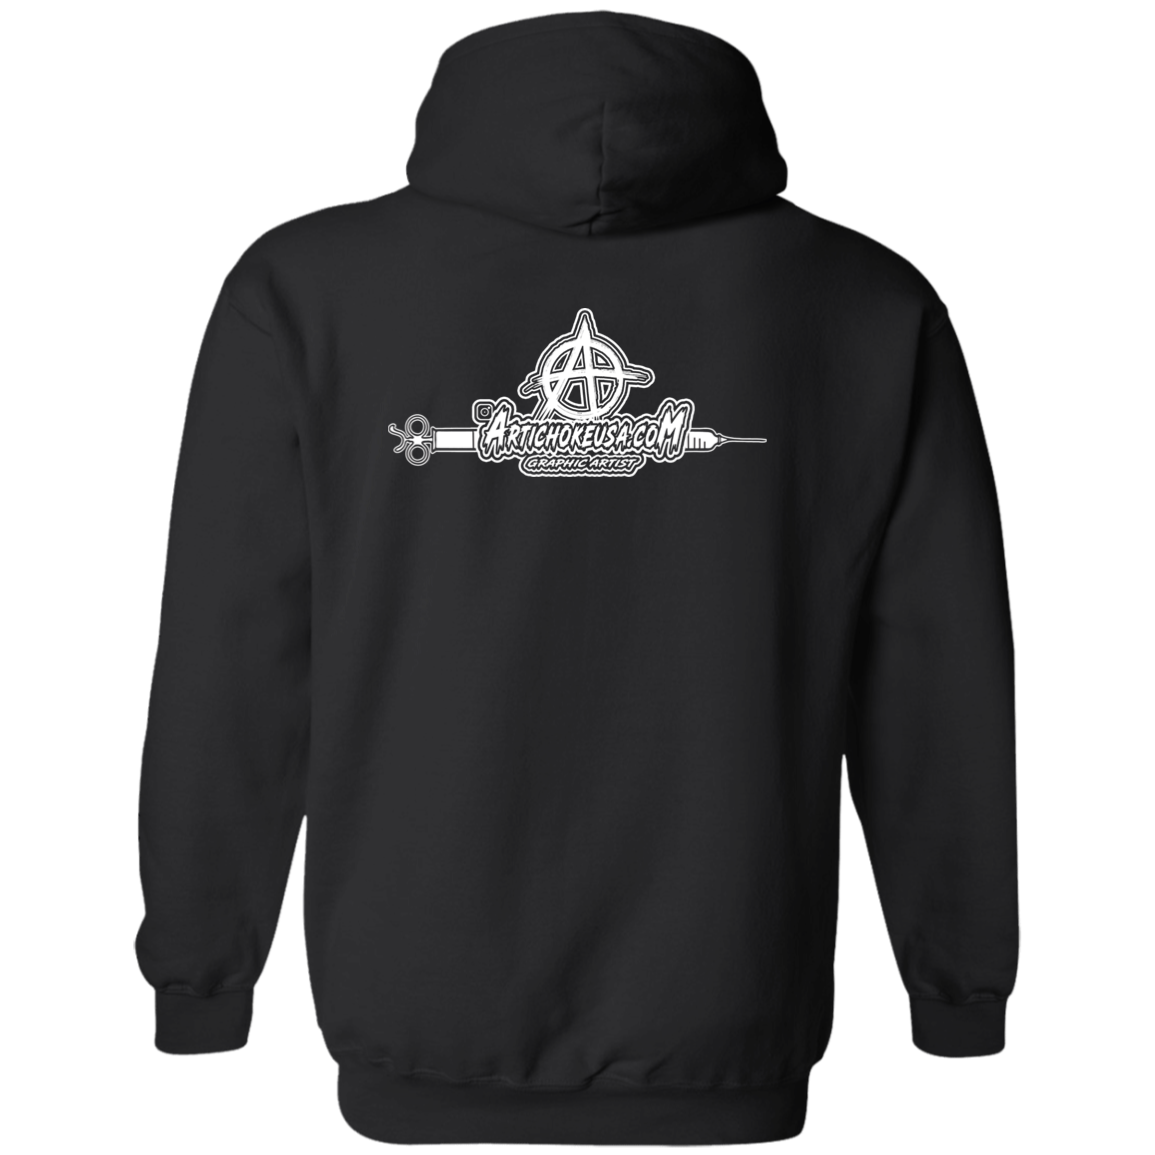 ArtichokeUSA Custom Design. Vaccinated AF (and fine). Basic Pullover Hoodie